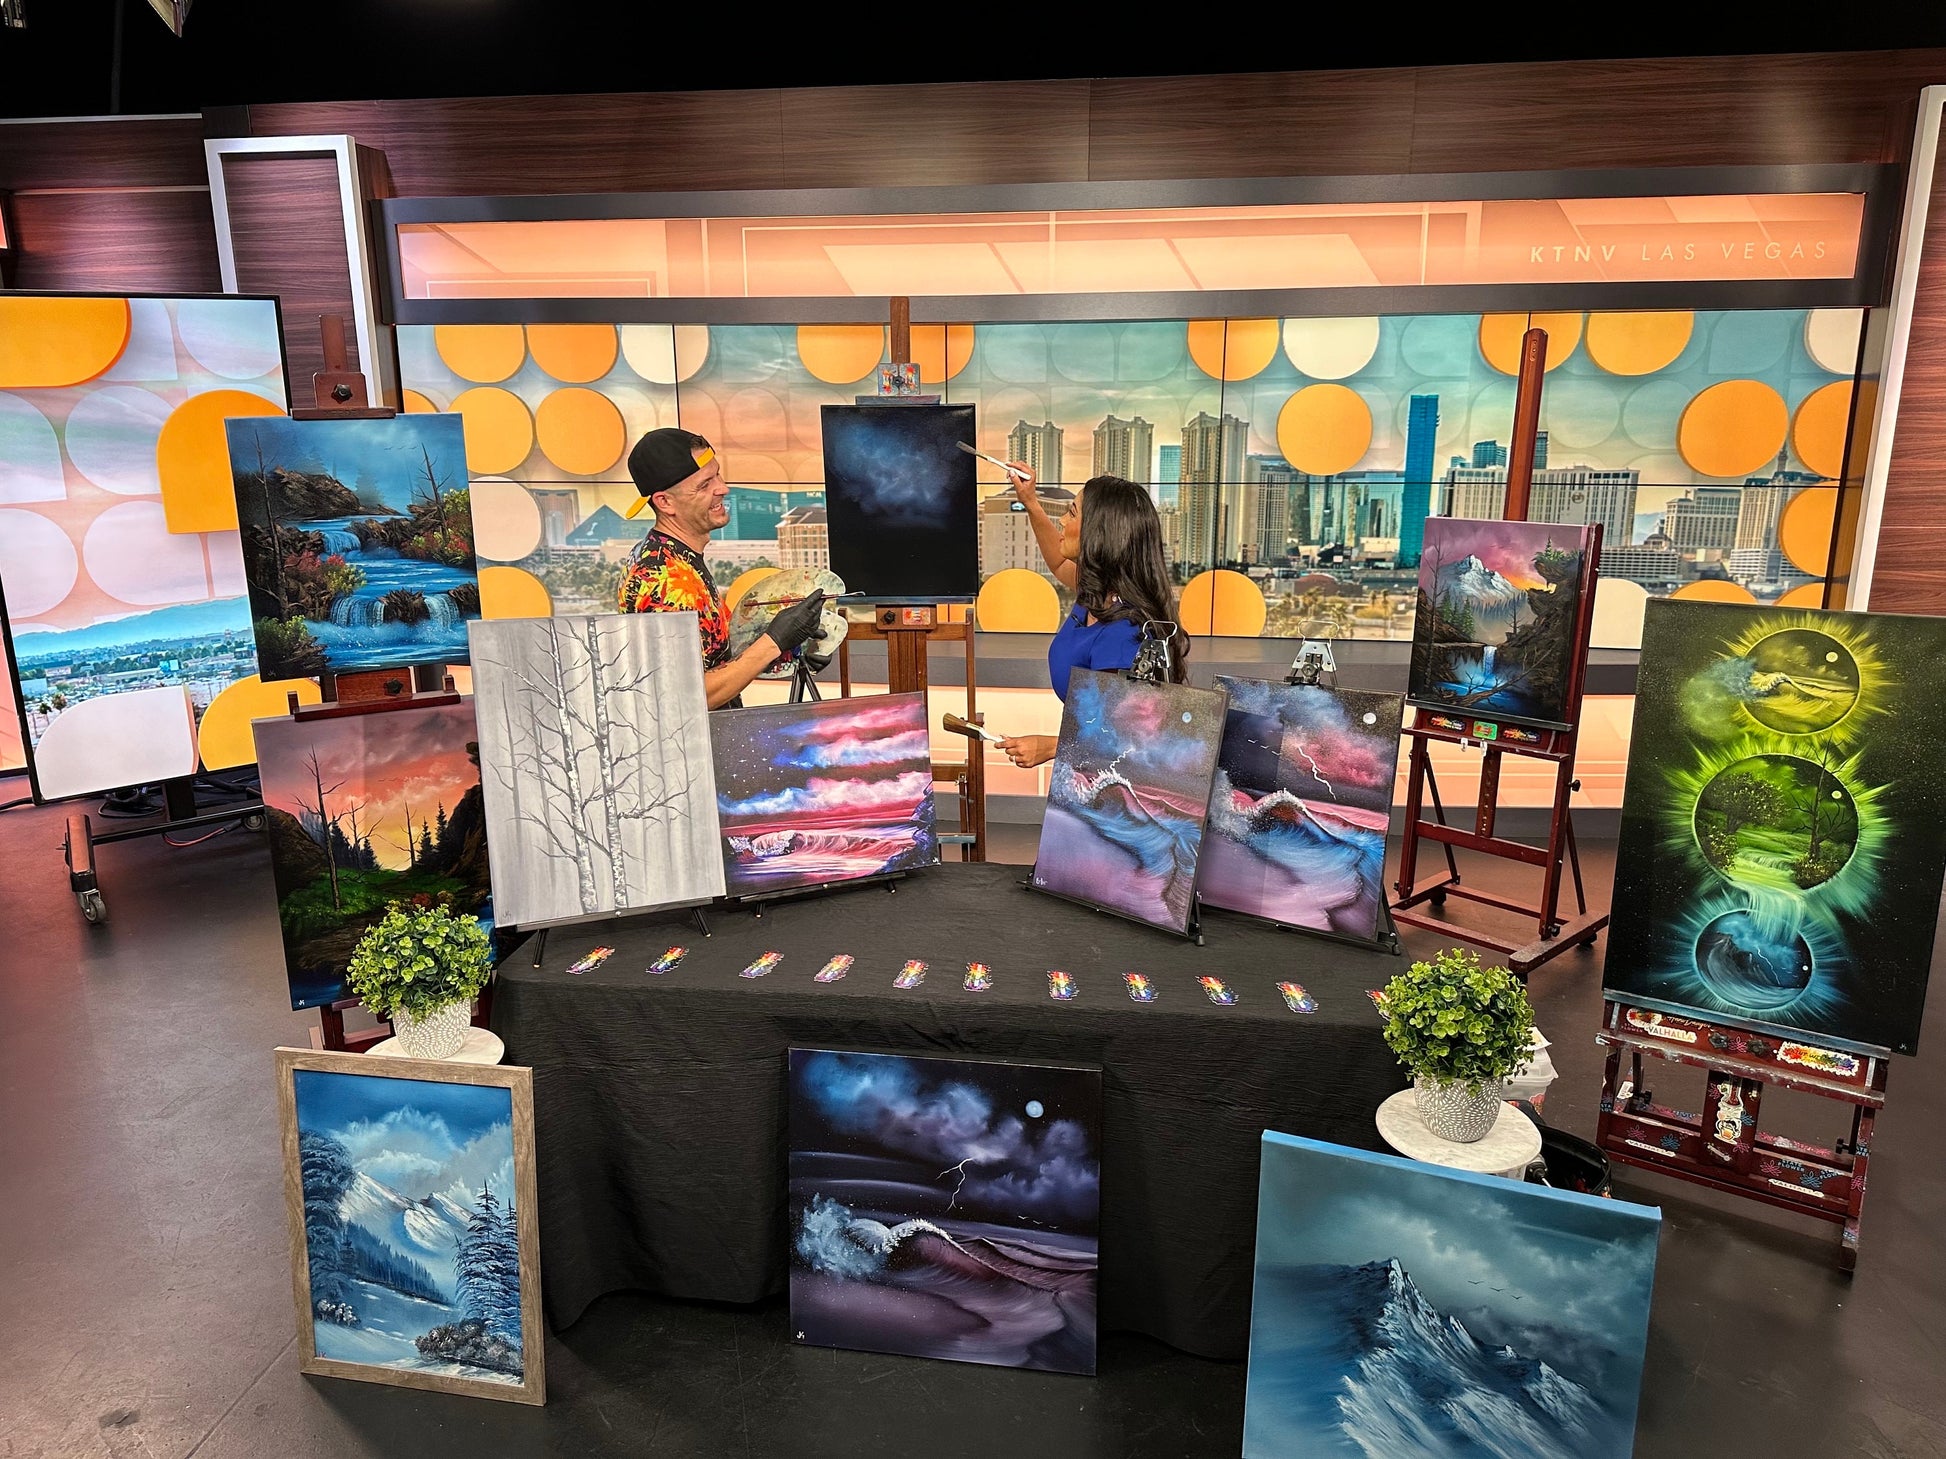 Virtual Painting Classes - How to Paint - PaintWithJosh 1 on 1 Virtual Class via video call